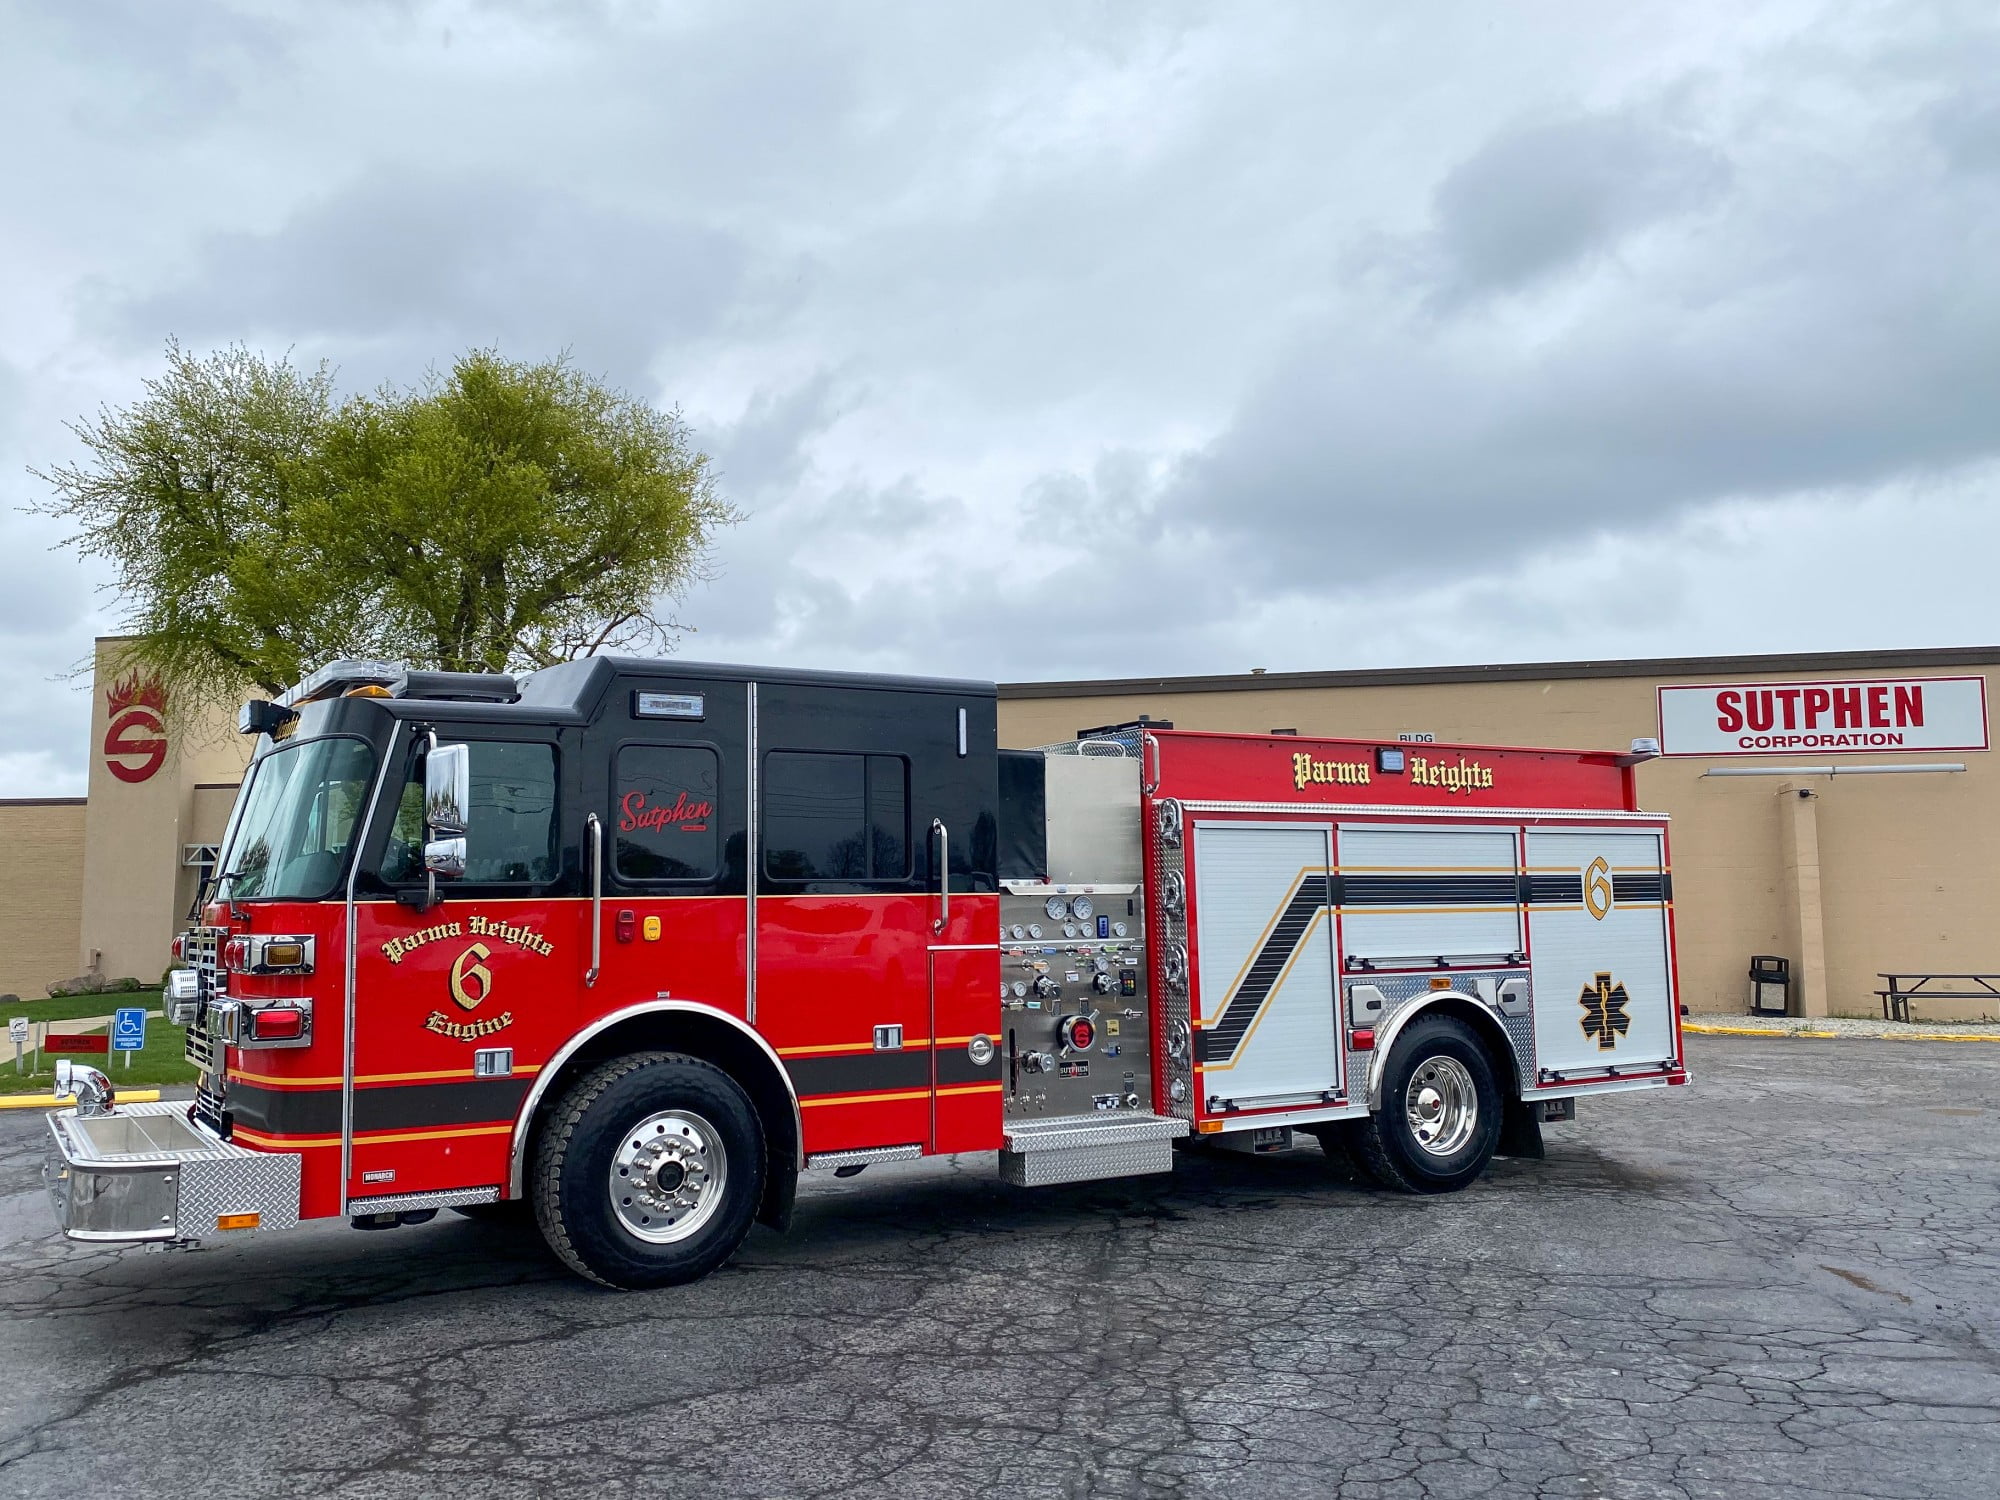 Parma Heights Fire Department